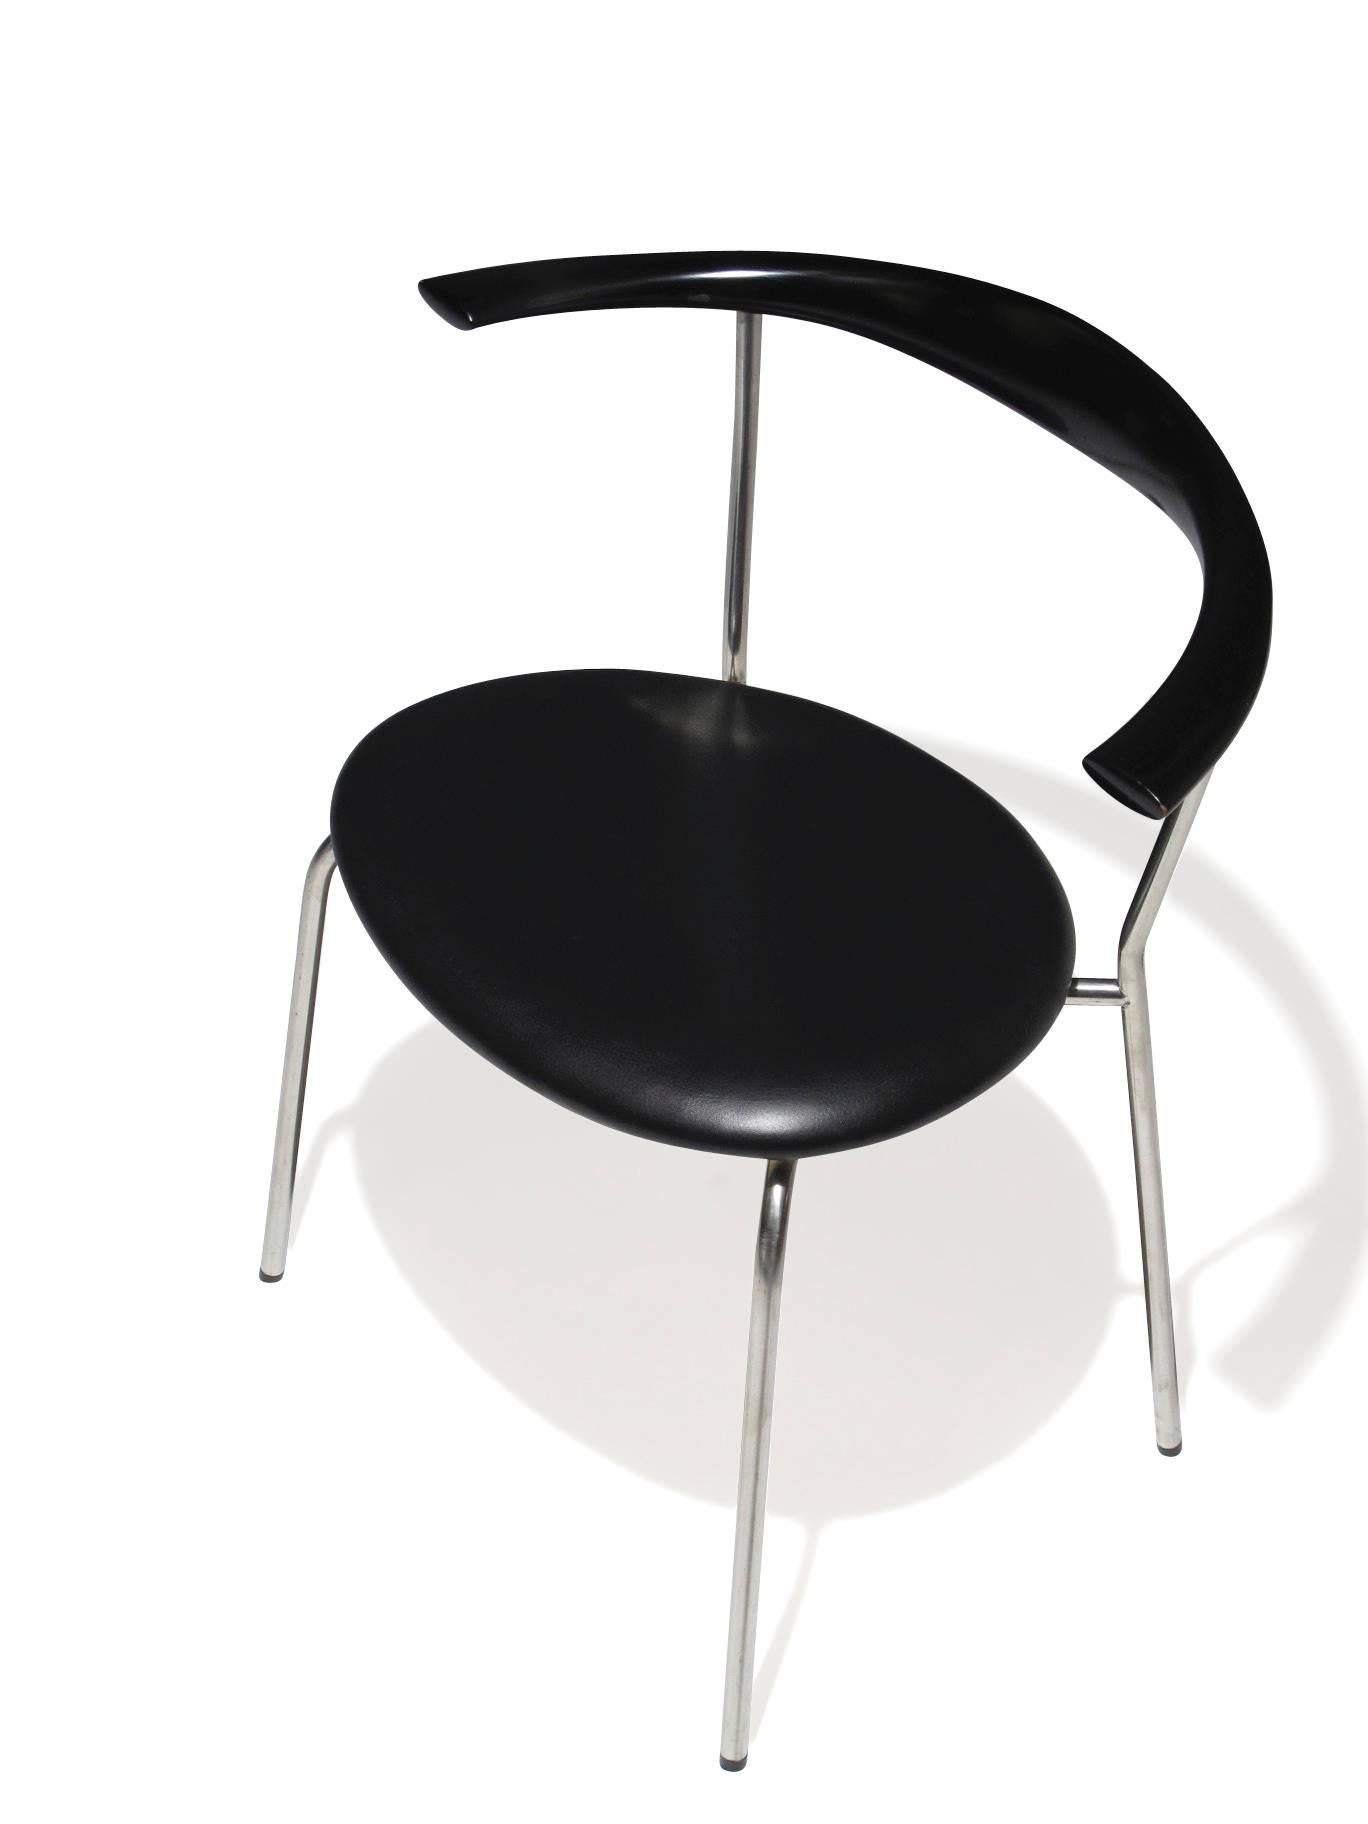 20th Century Hans Wegner Pp701 Bull Horn Dining Chairs in Black Lacquer, Leather and Steel